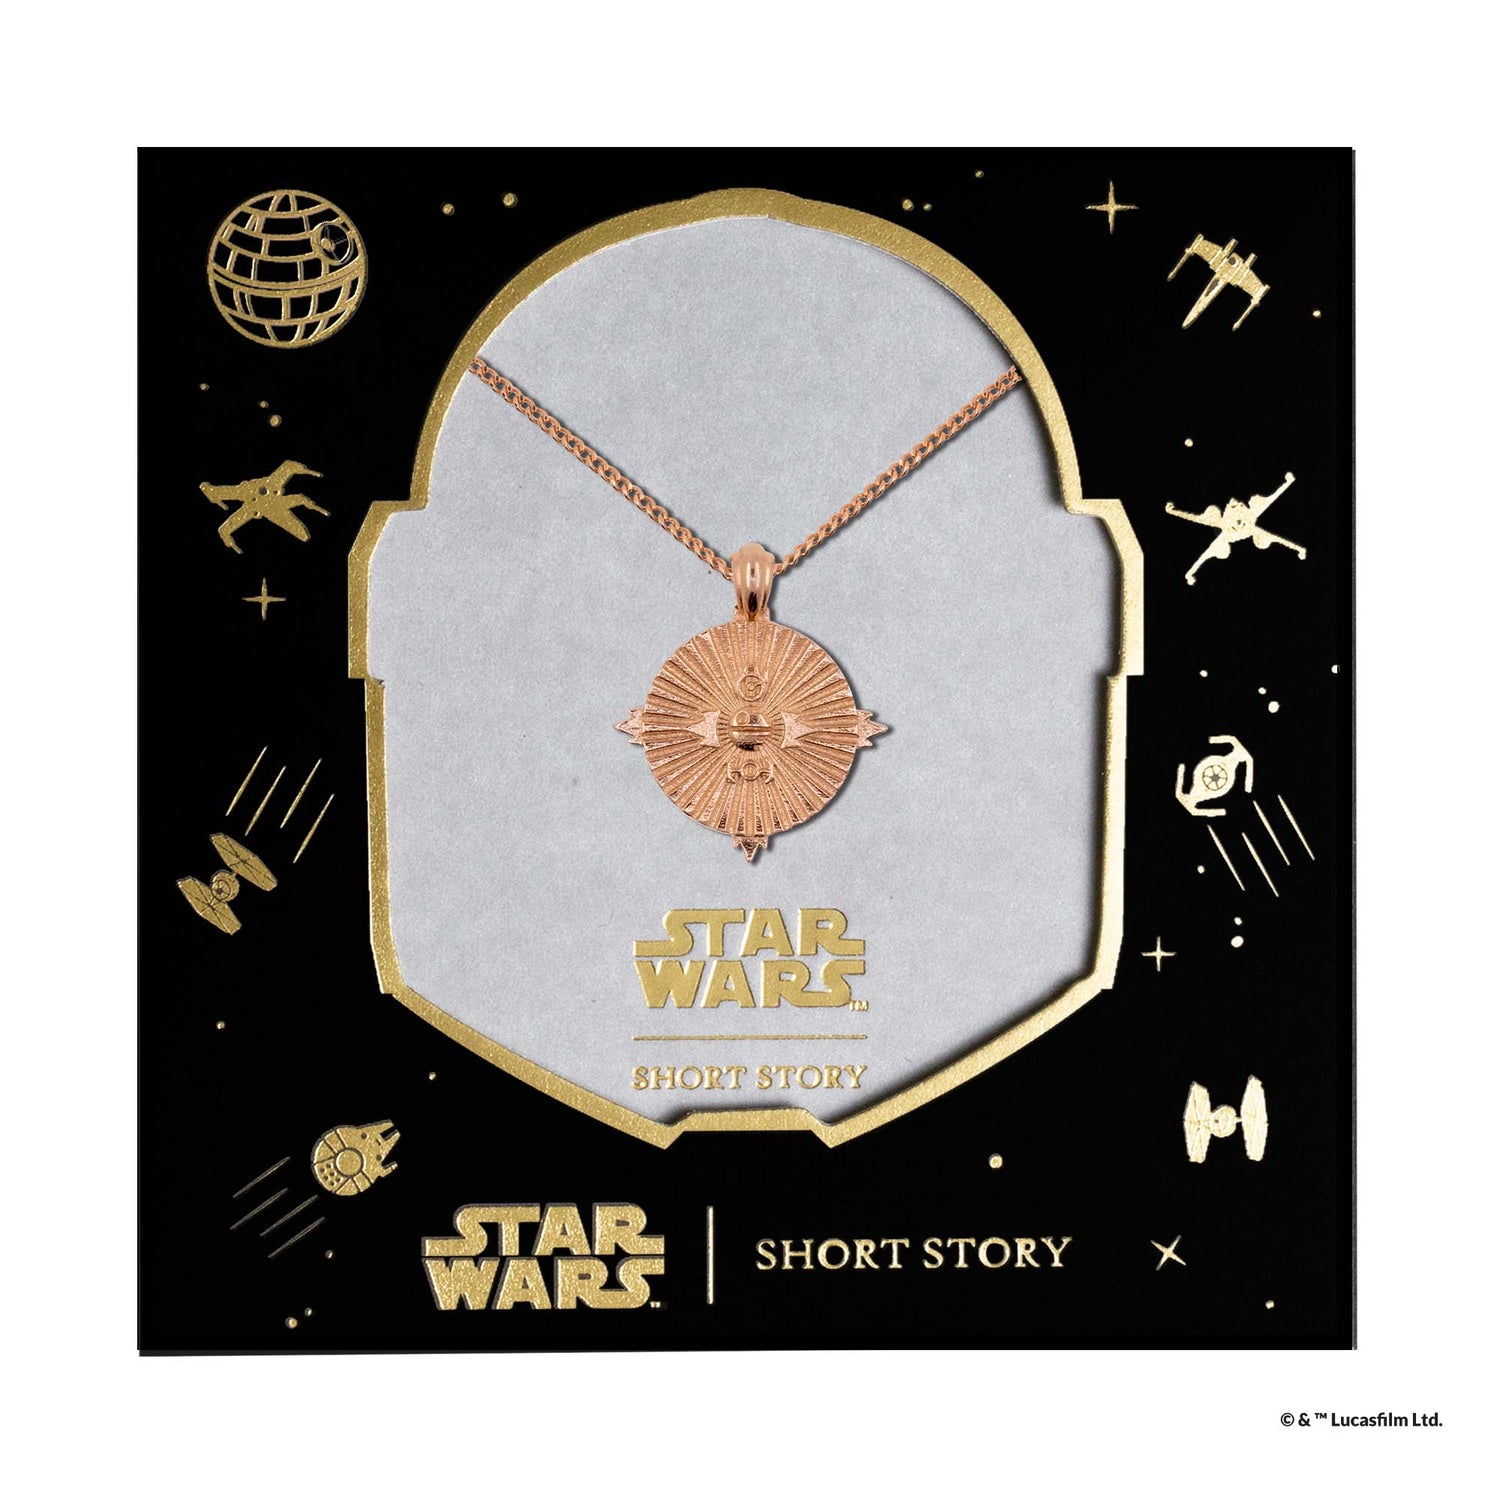 Star Wars™ Necklace The Sith™ Rose Gold